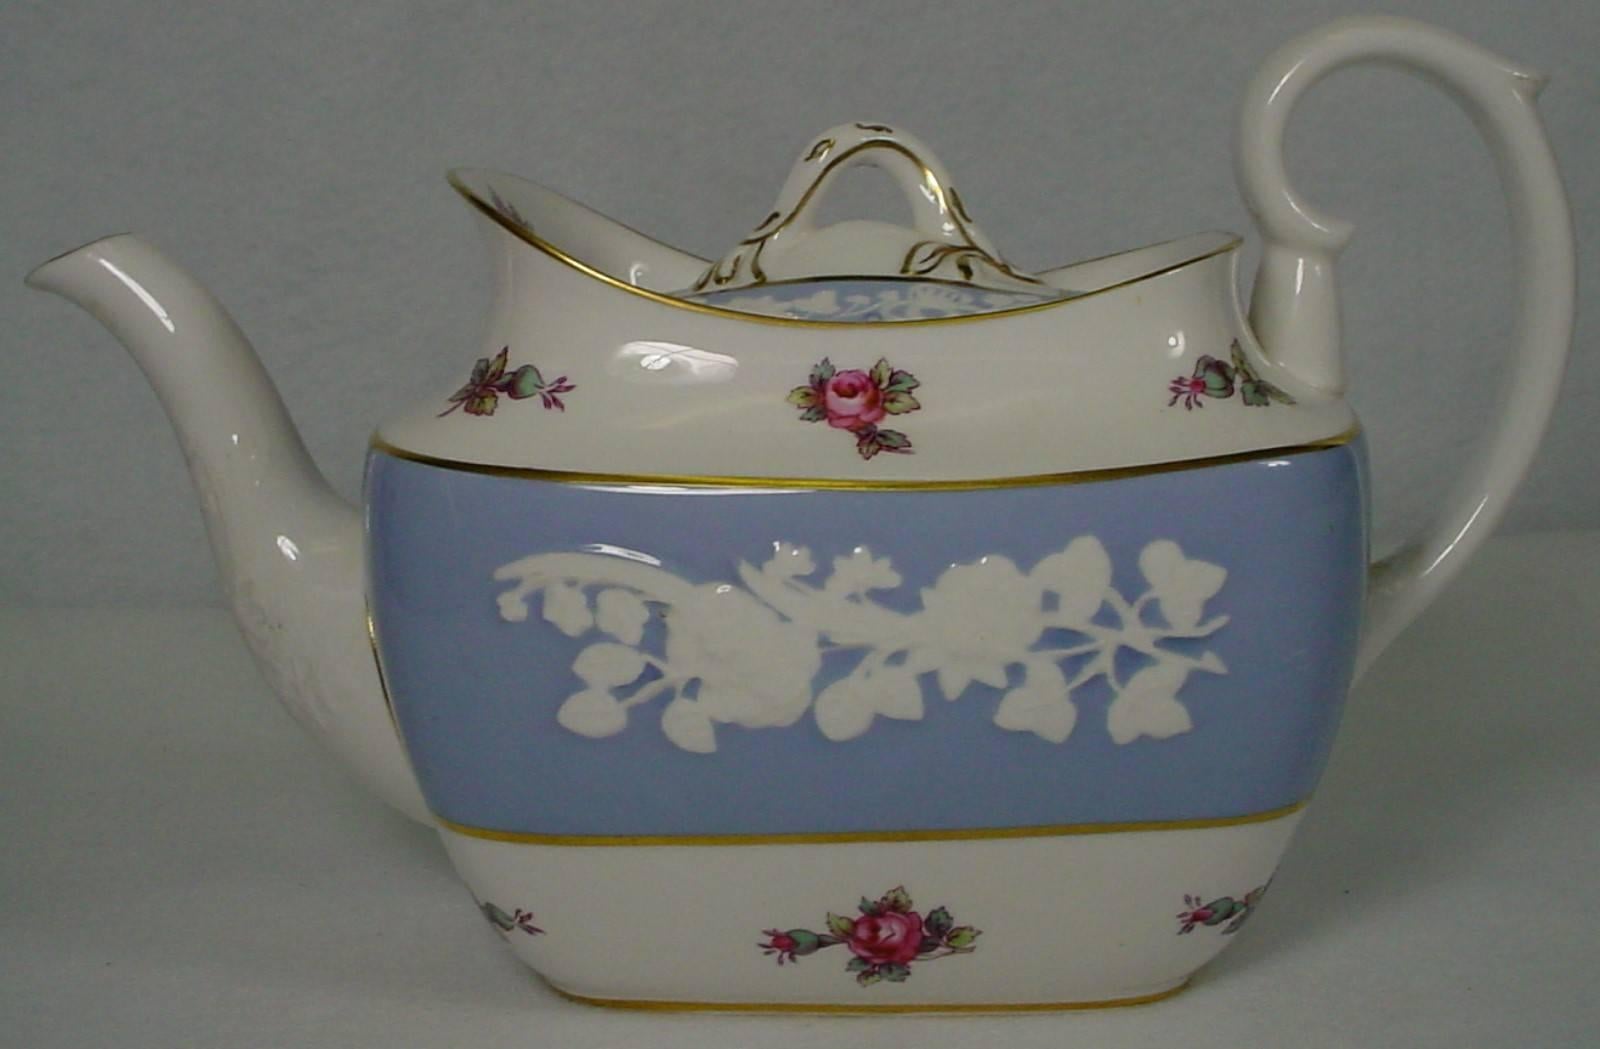 Spode China Maritime Rose R4118 pattern teapot with lid,

in great condition with minimal use.

• Production dates: 1954-1972.

• Measures @ 42 oz.

• White flowers on blue.

• Floral mold.

• Gold trim.